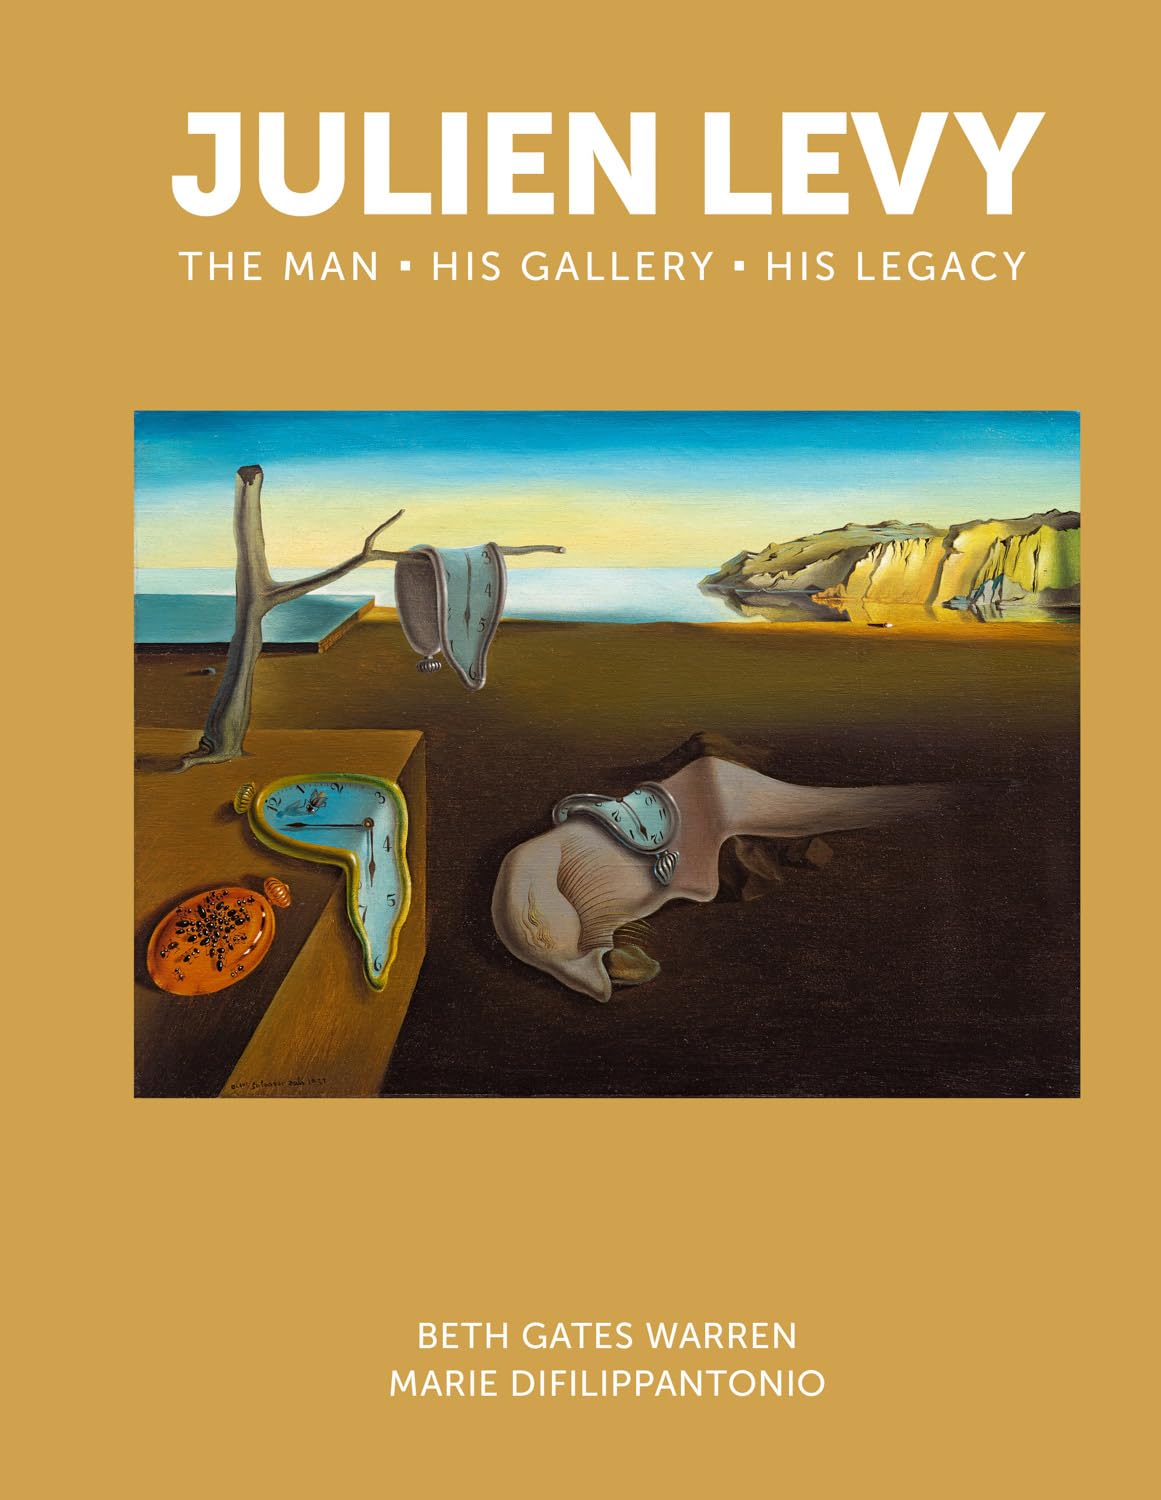 Julien Levy: The Man, His Gallery, His Legacy